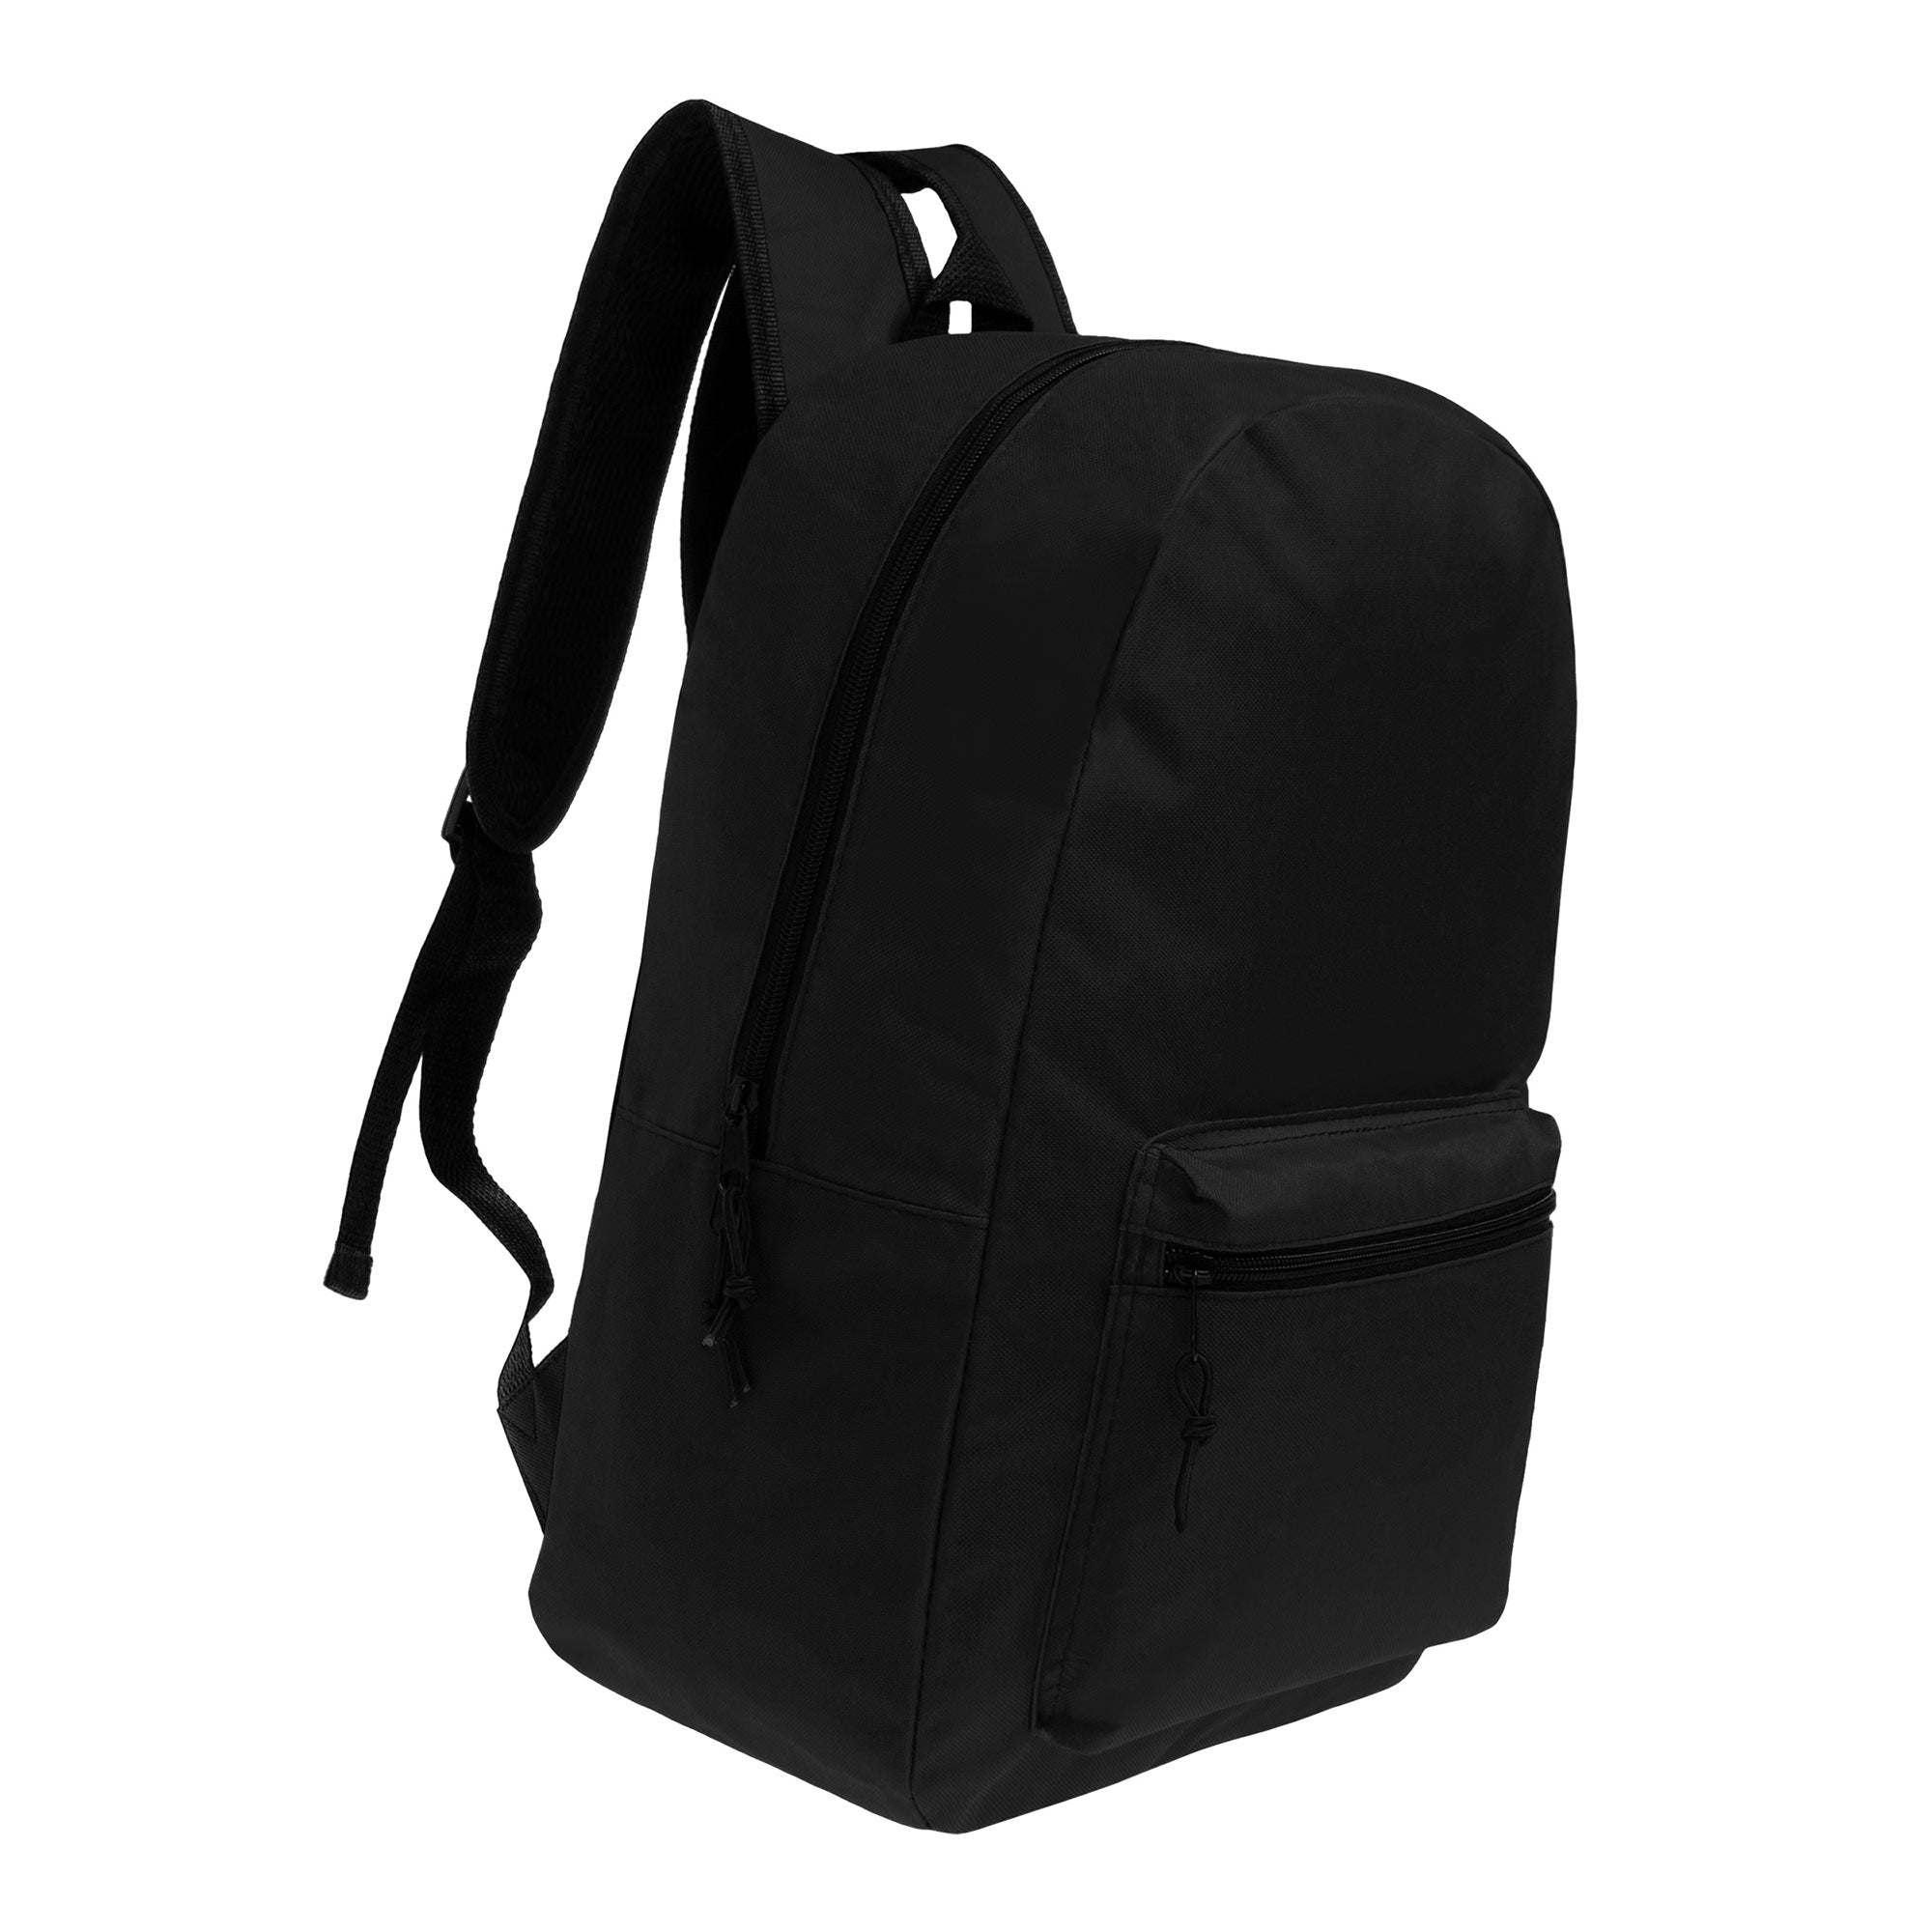 15 inch black wholesale backpack 24 piece case